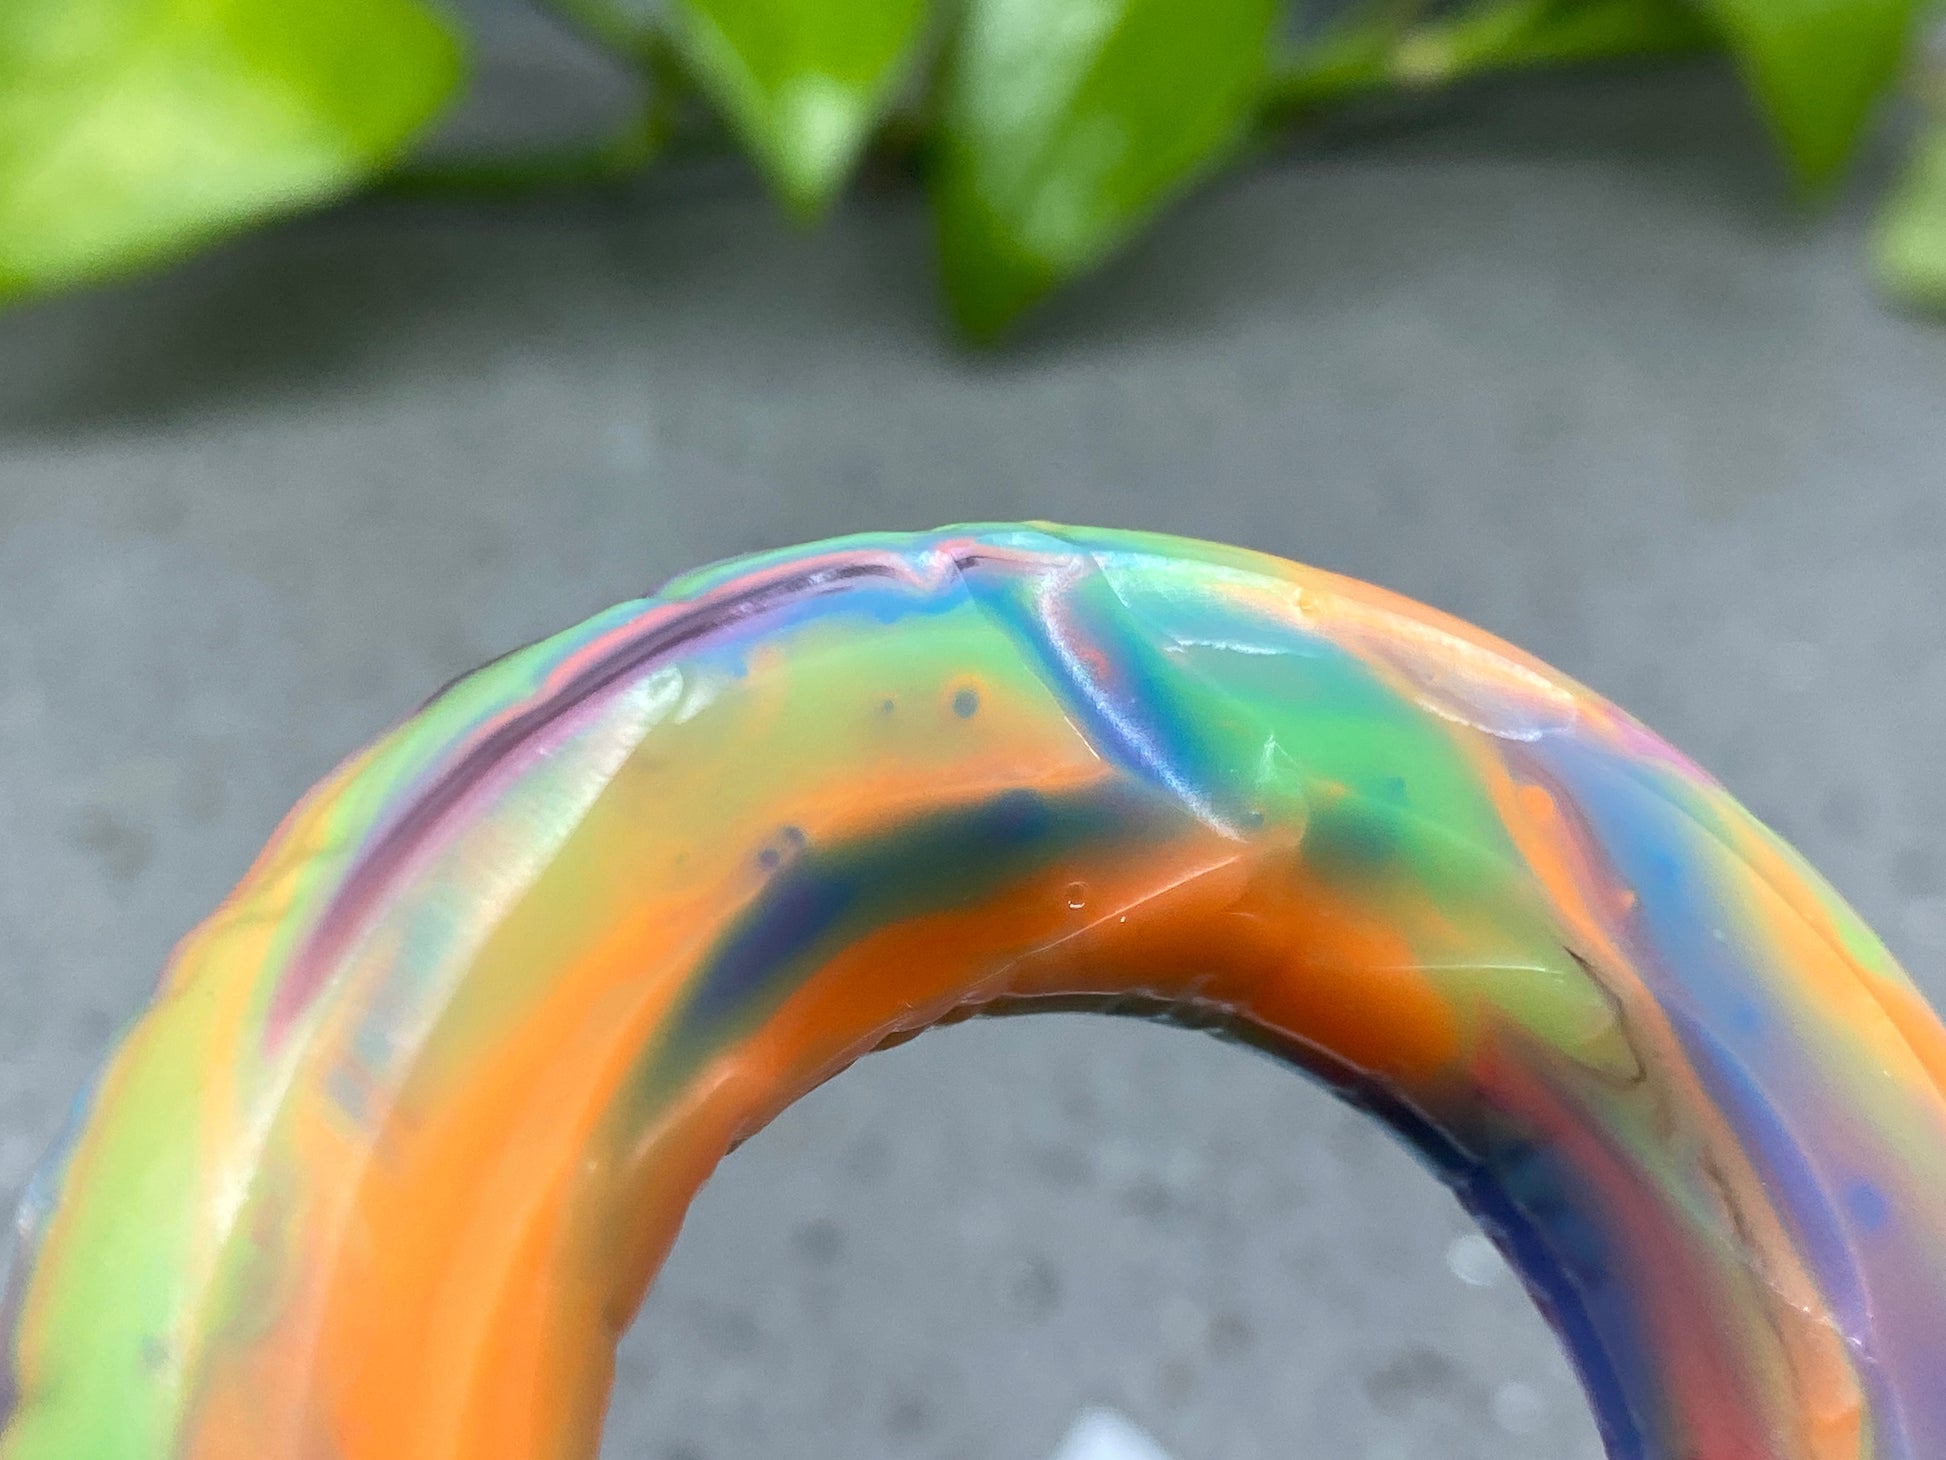 a close up of a colorful object near a plant